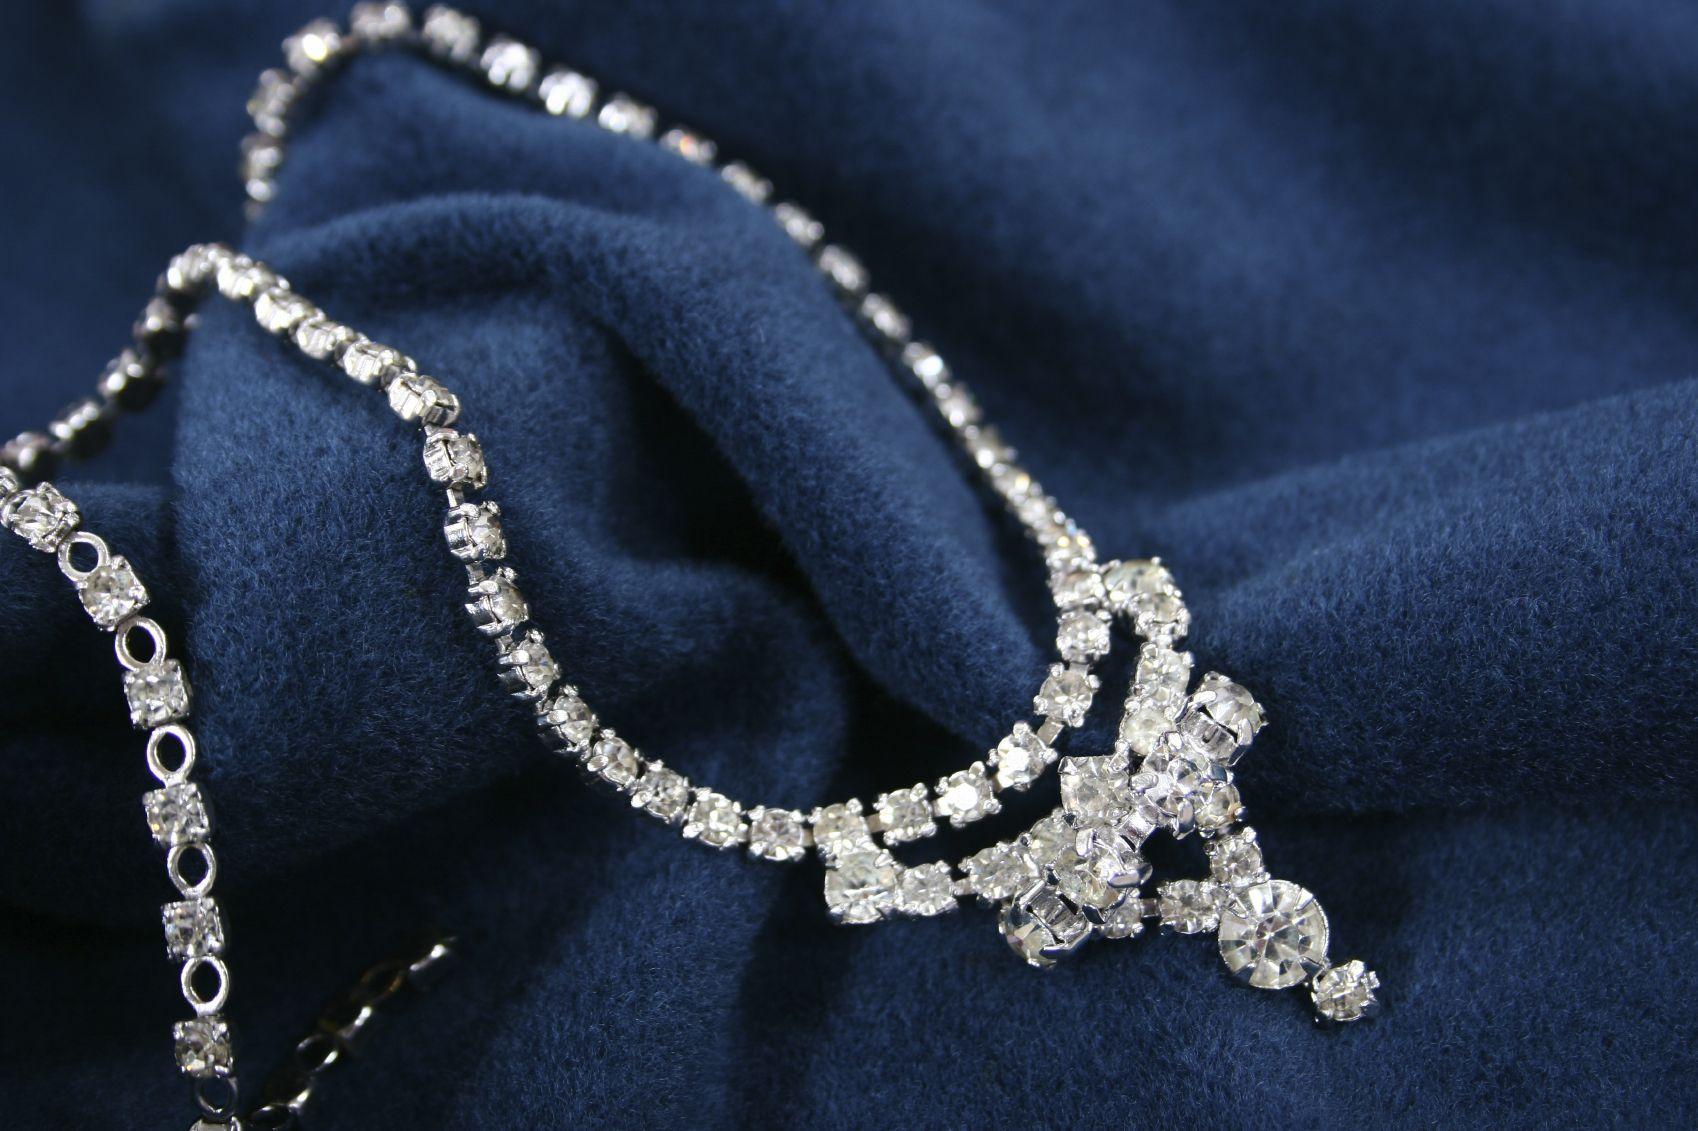 Simple Diamond Necklace Wallpaper Image Very High